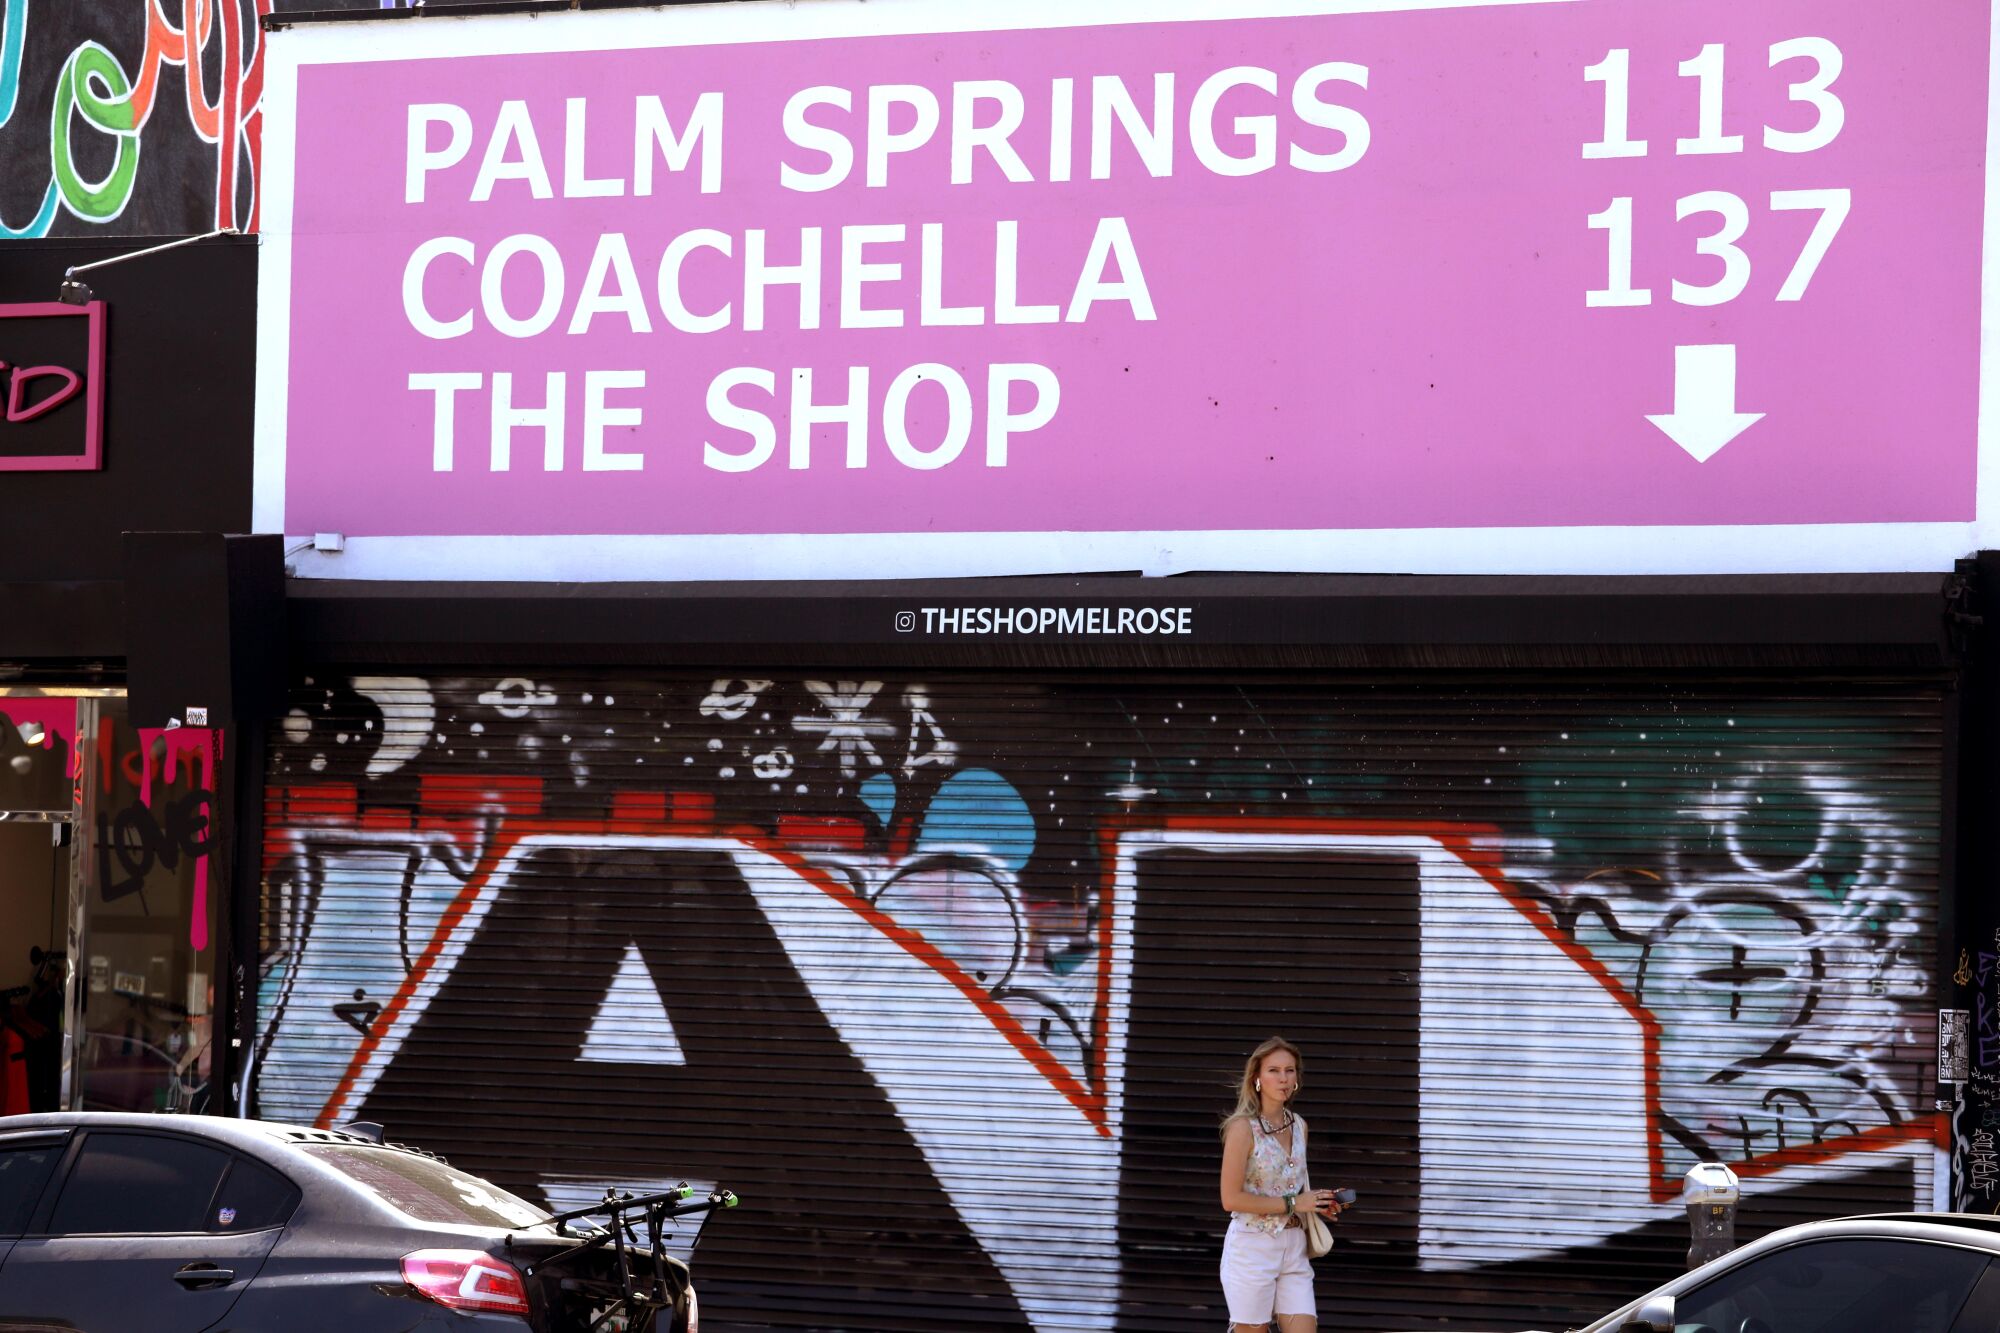 A sign on a street says, "Palm Springs 113, Coachella 137, The Shop (with an arrow pointing down)"